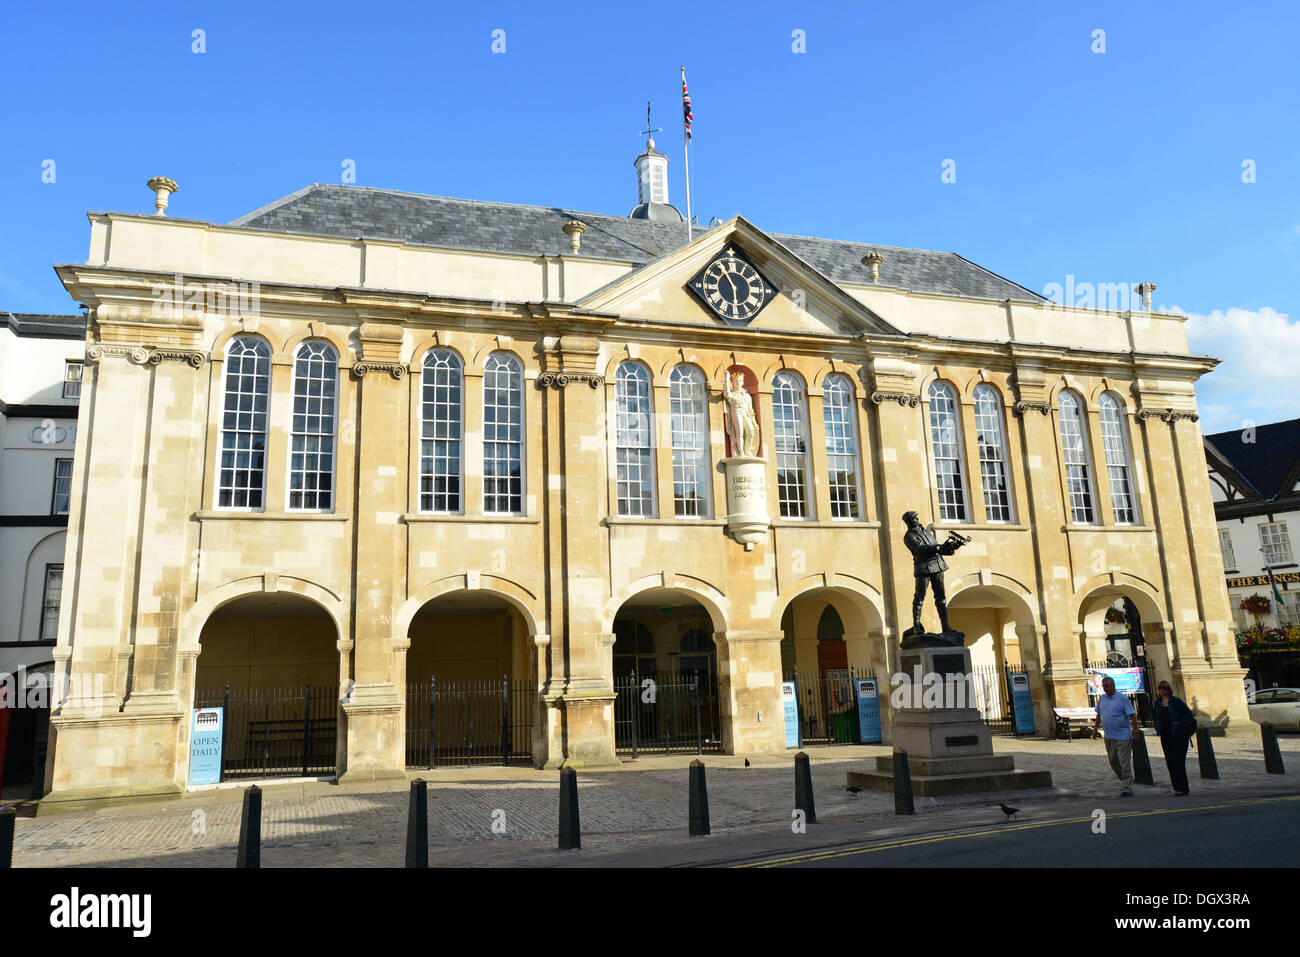 18th century Shire Hall, Agincourt Square, Monmouth, Monmouthshire, Wales, United Kingdom Stock Photo